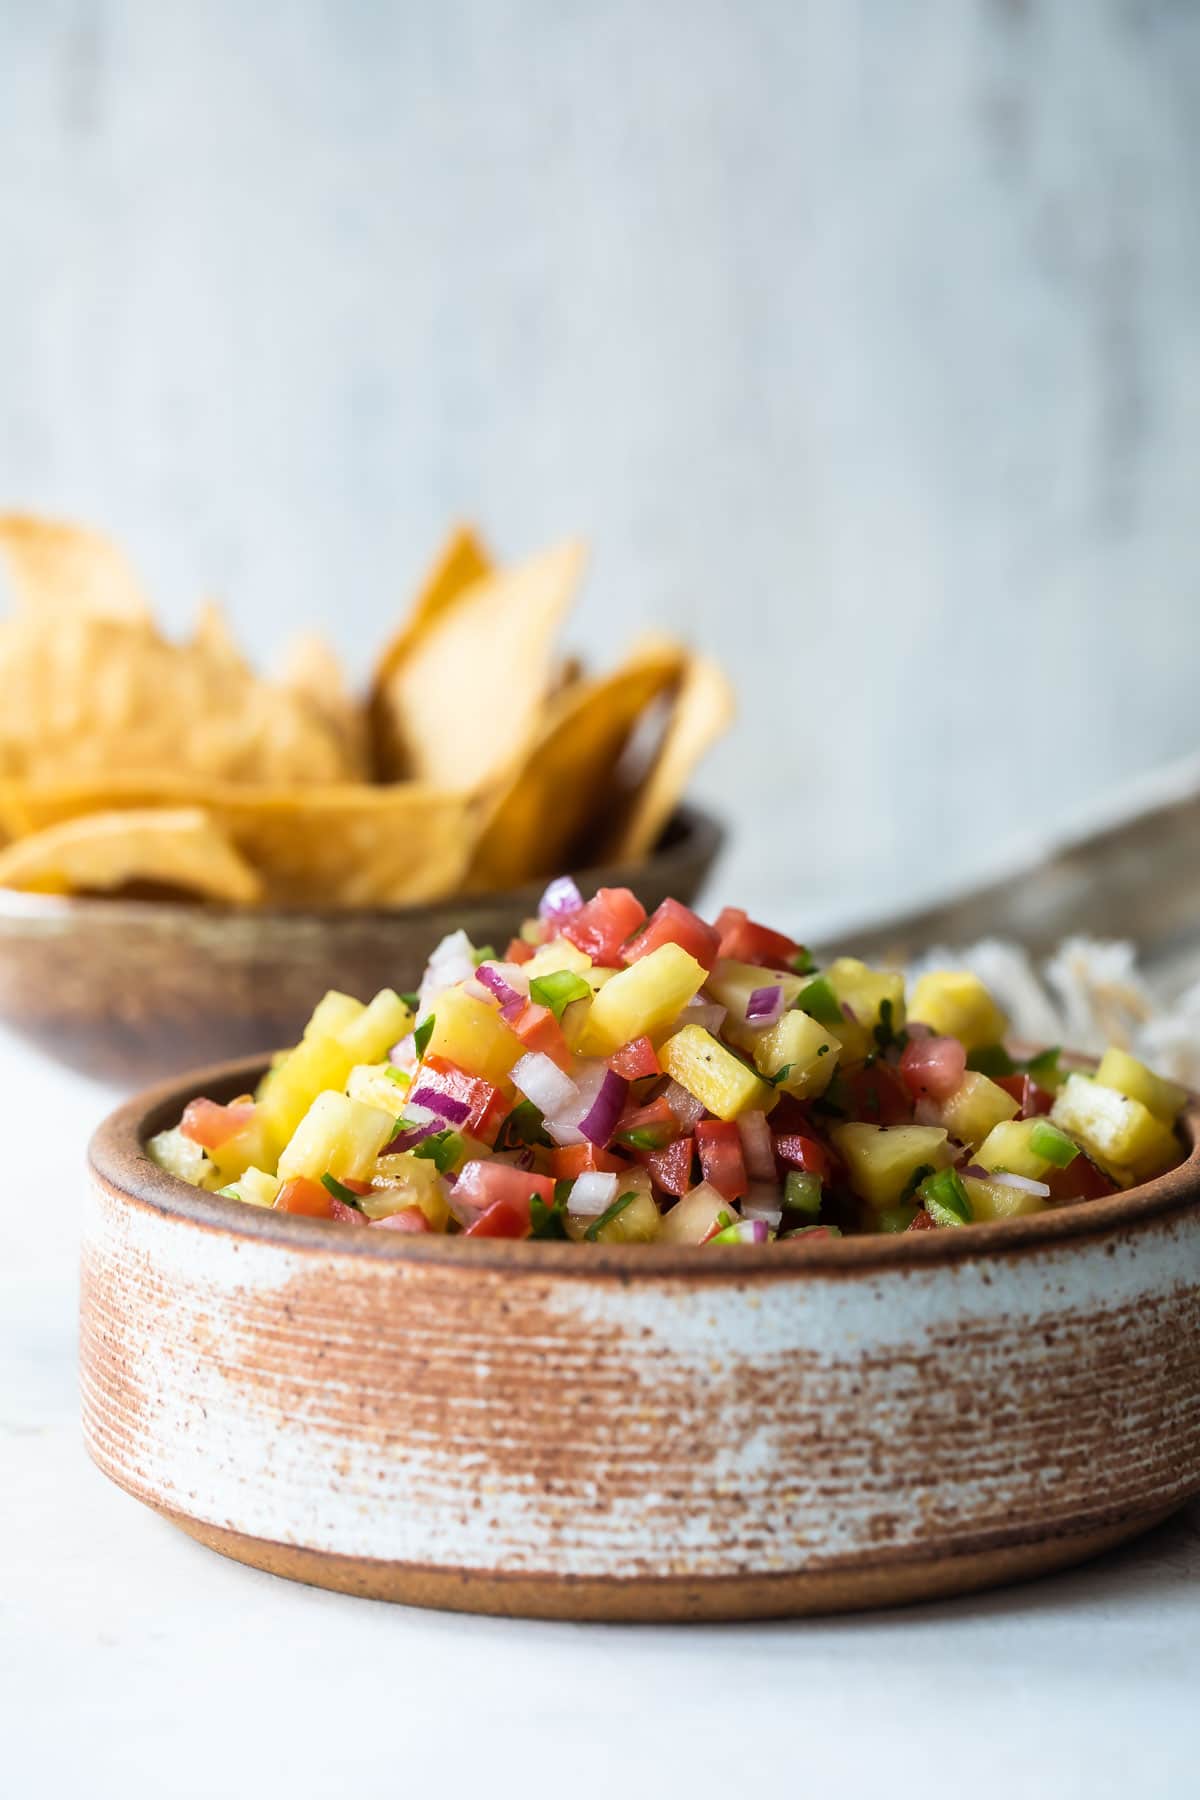 Pineapple salsa in a brown bowl.